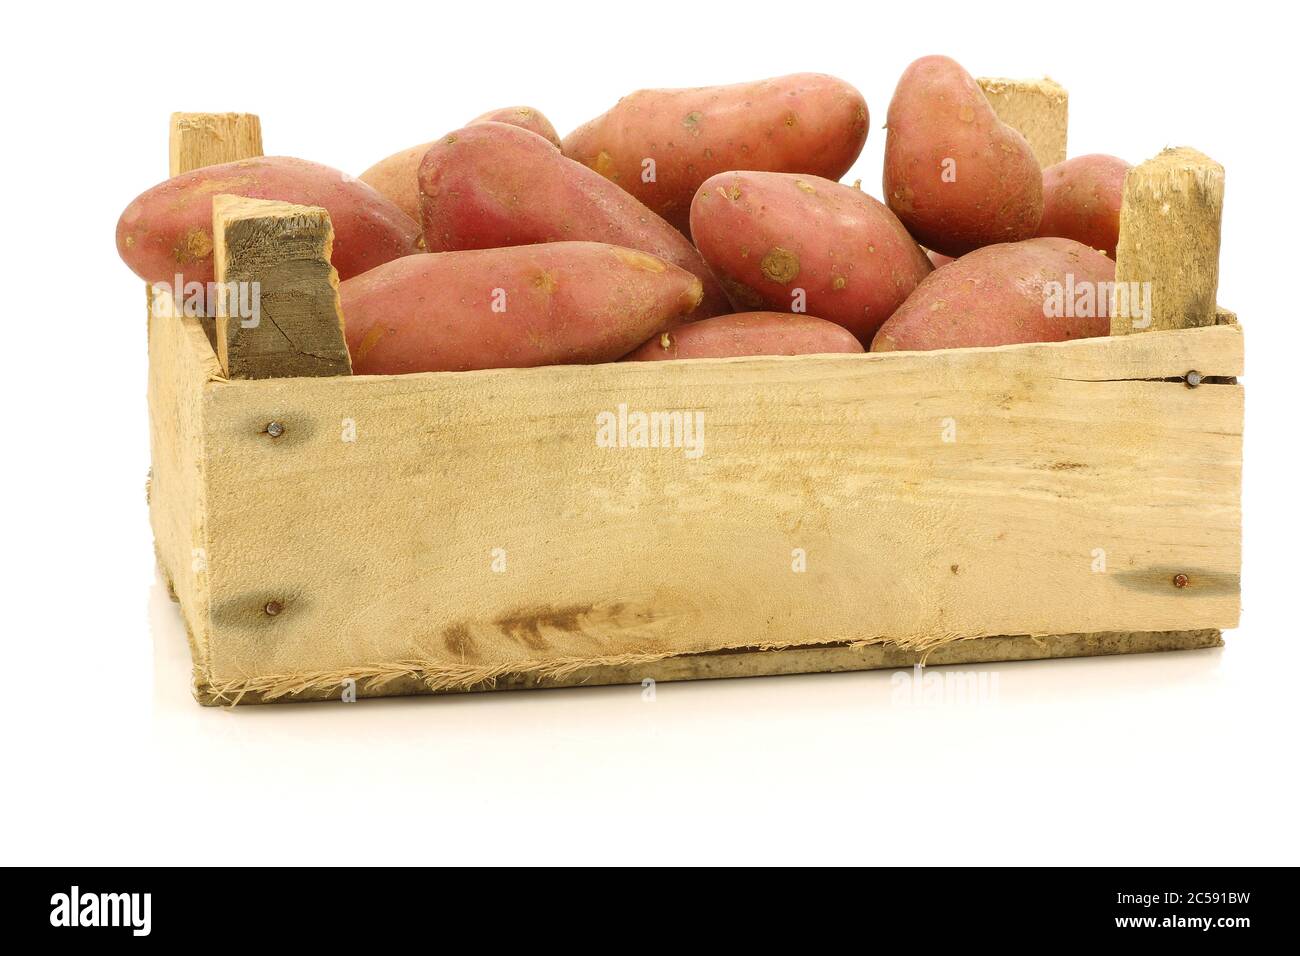 fresh roseval potatoes ina wooden box on a white background Stock Photo